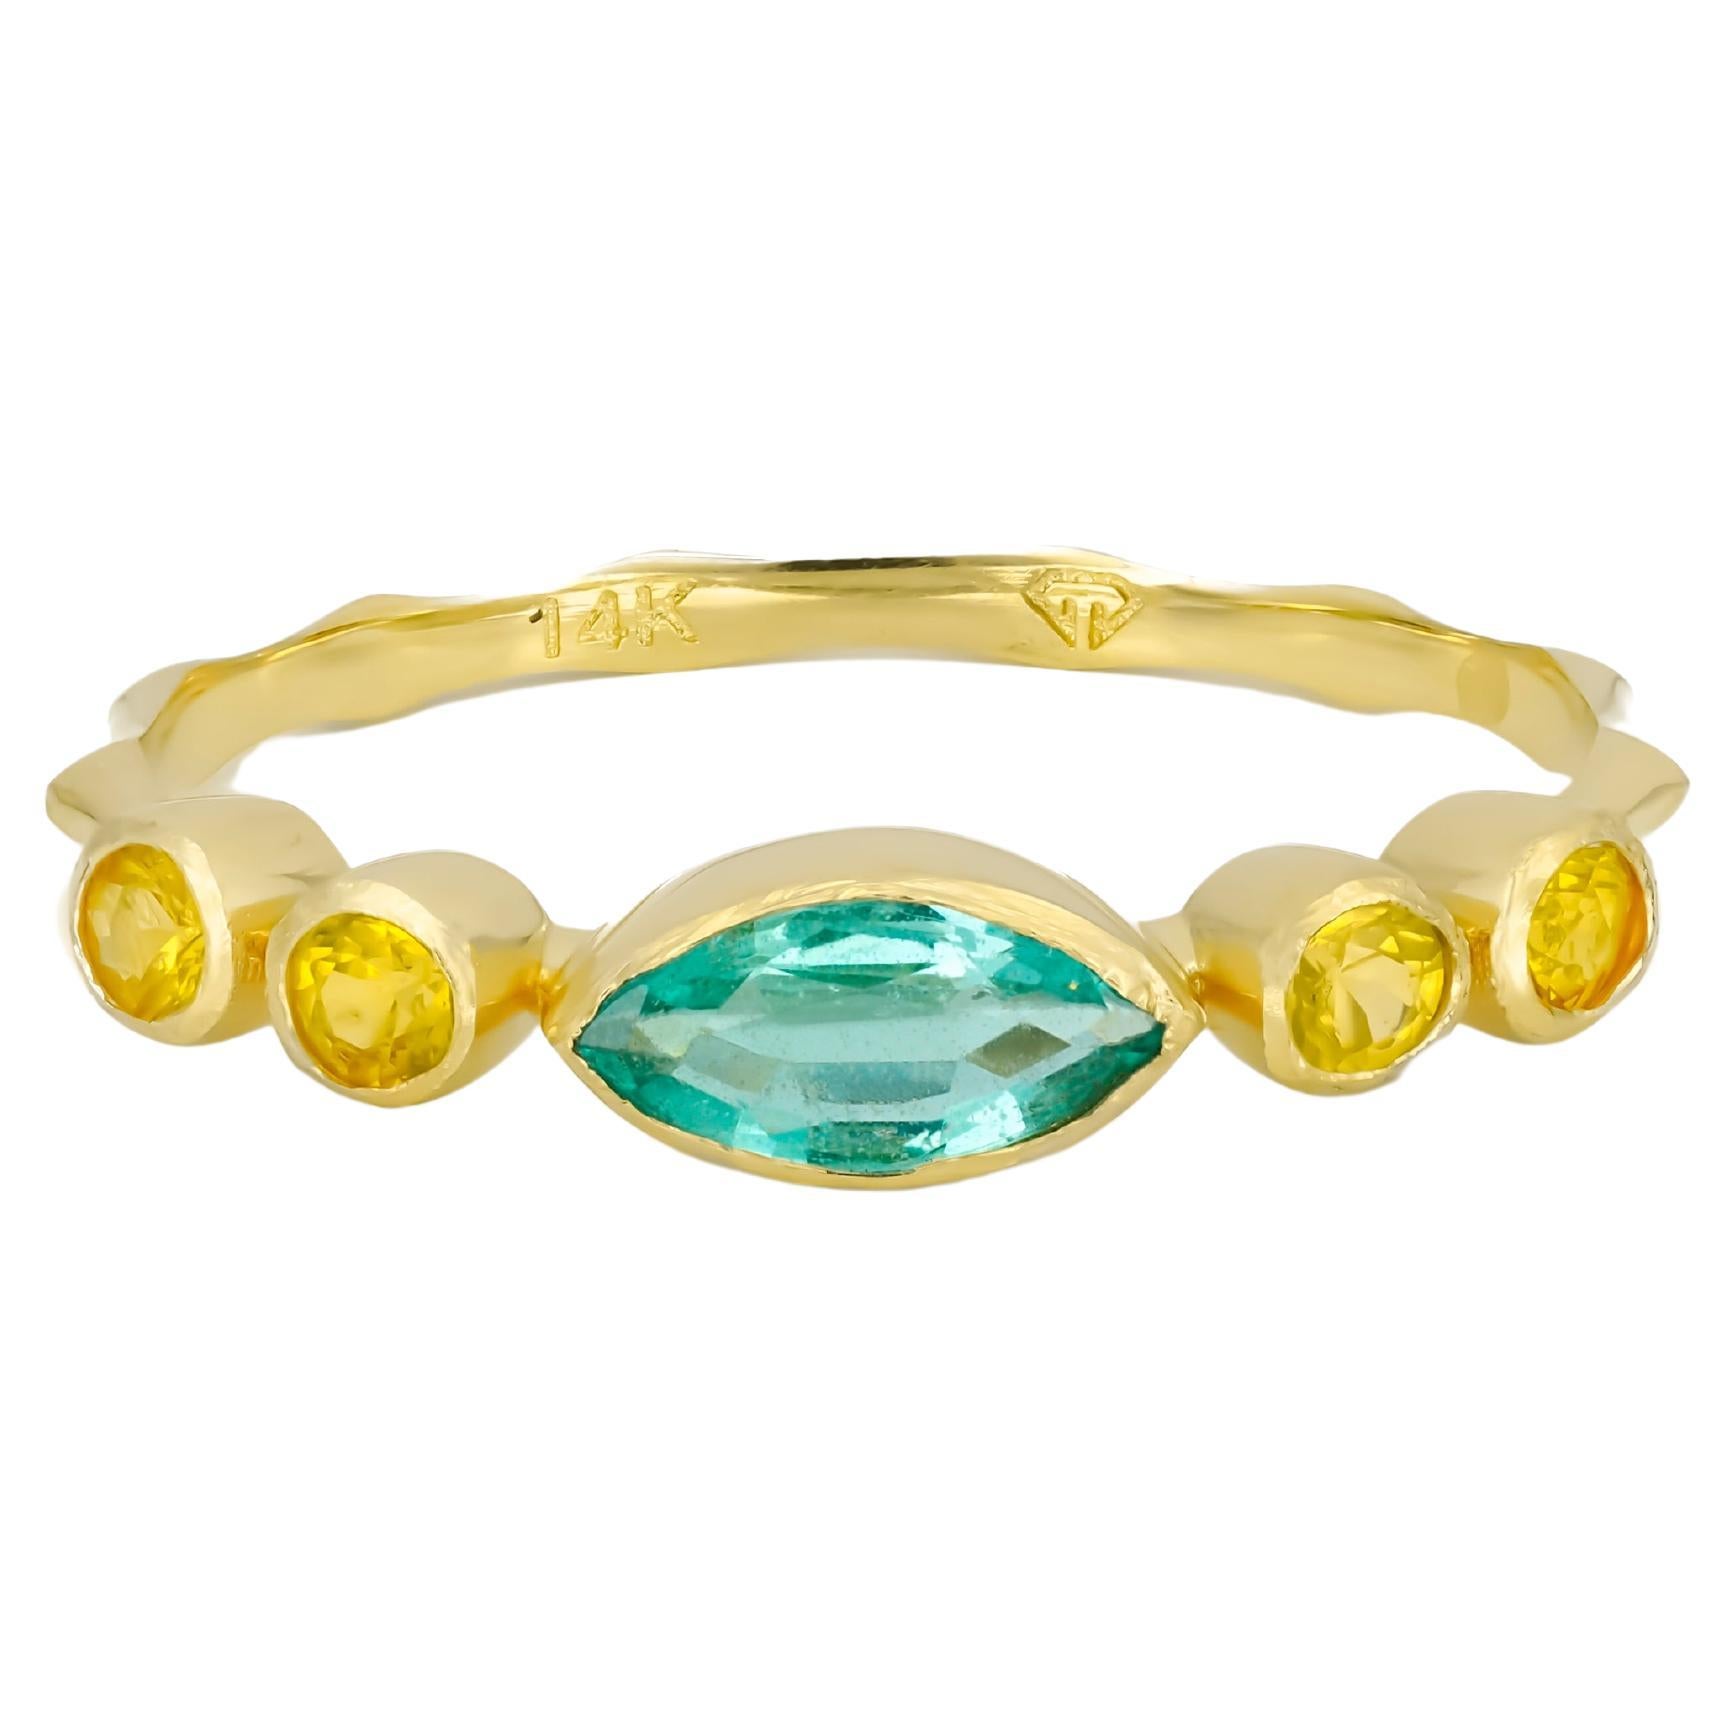 Marquise Emerald Ring in 14k Gold, Emerald and Yellow Sapphire Ring